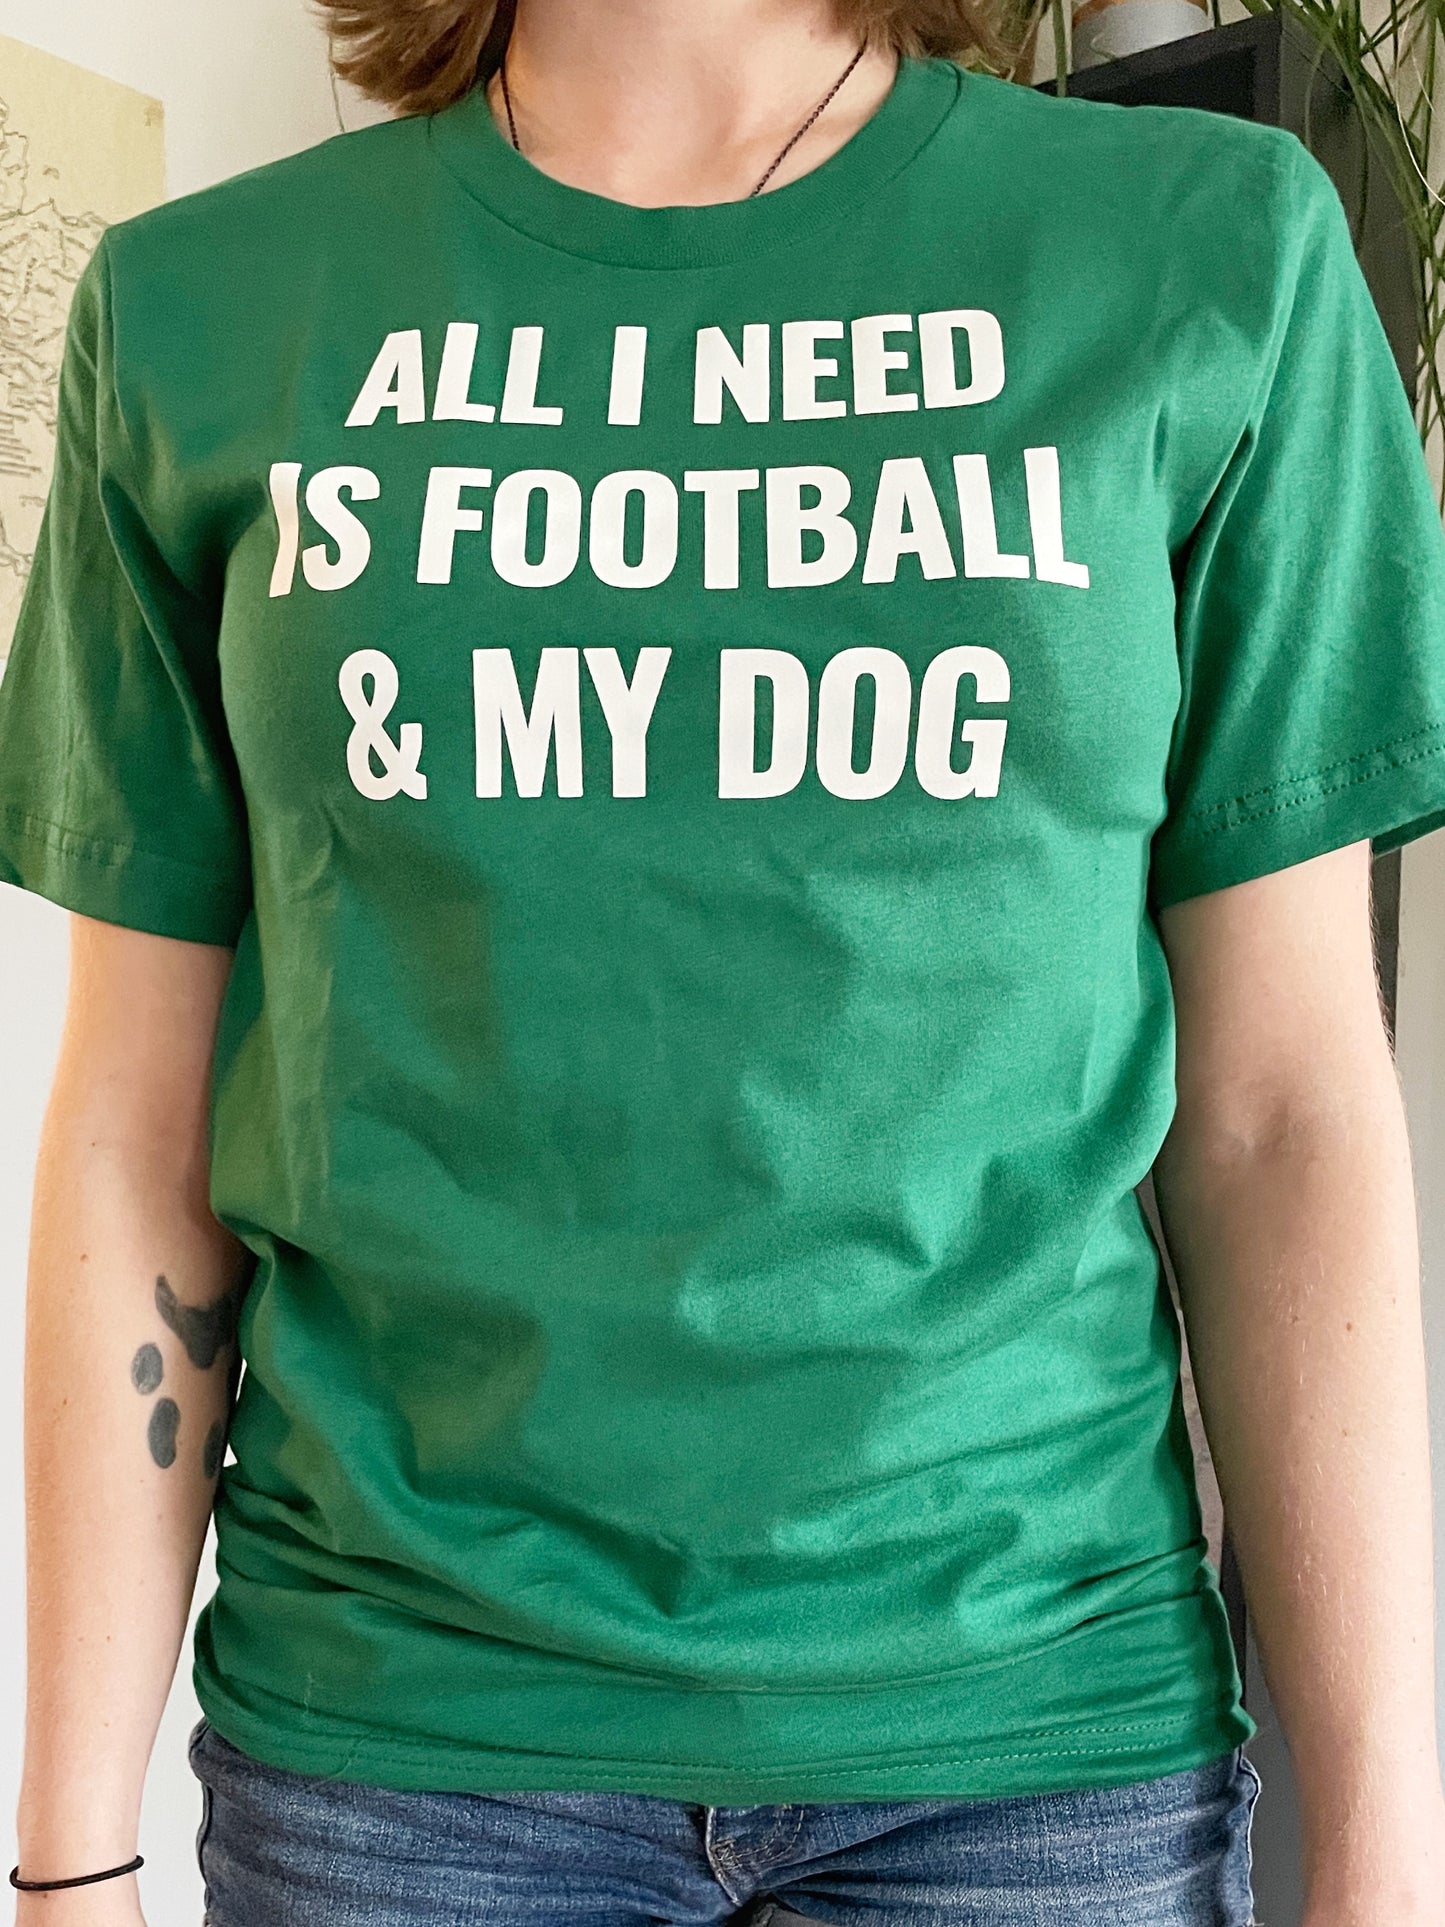 All I Need is Football and My Dog T-Shirt